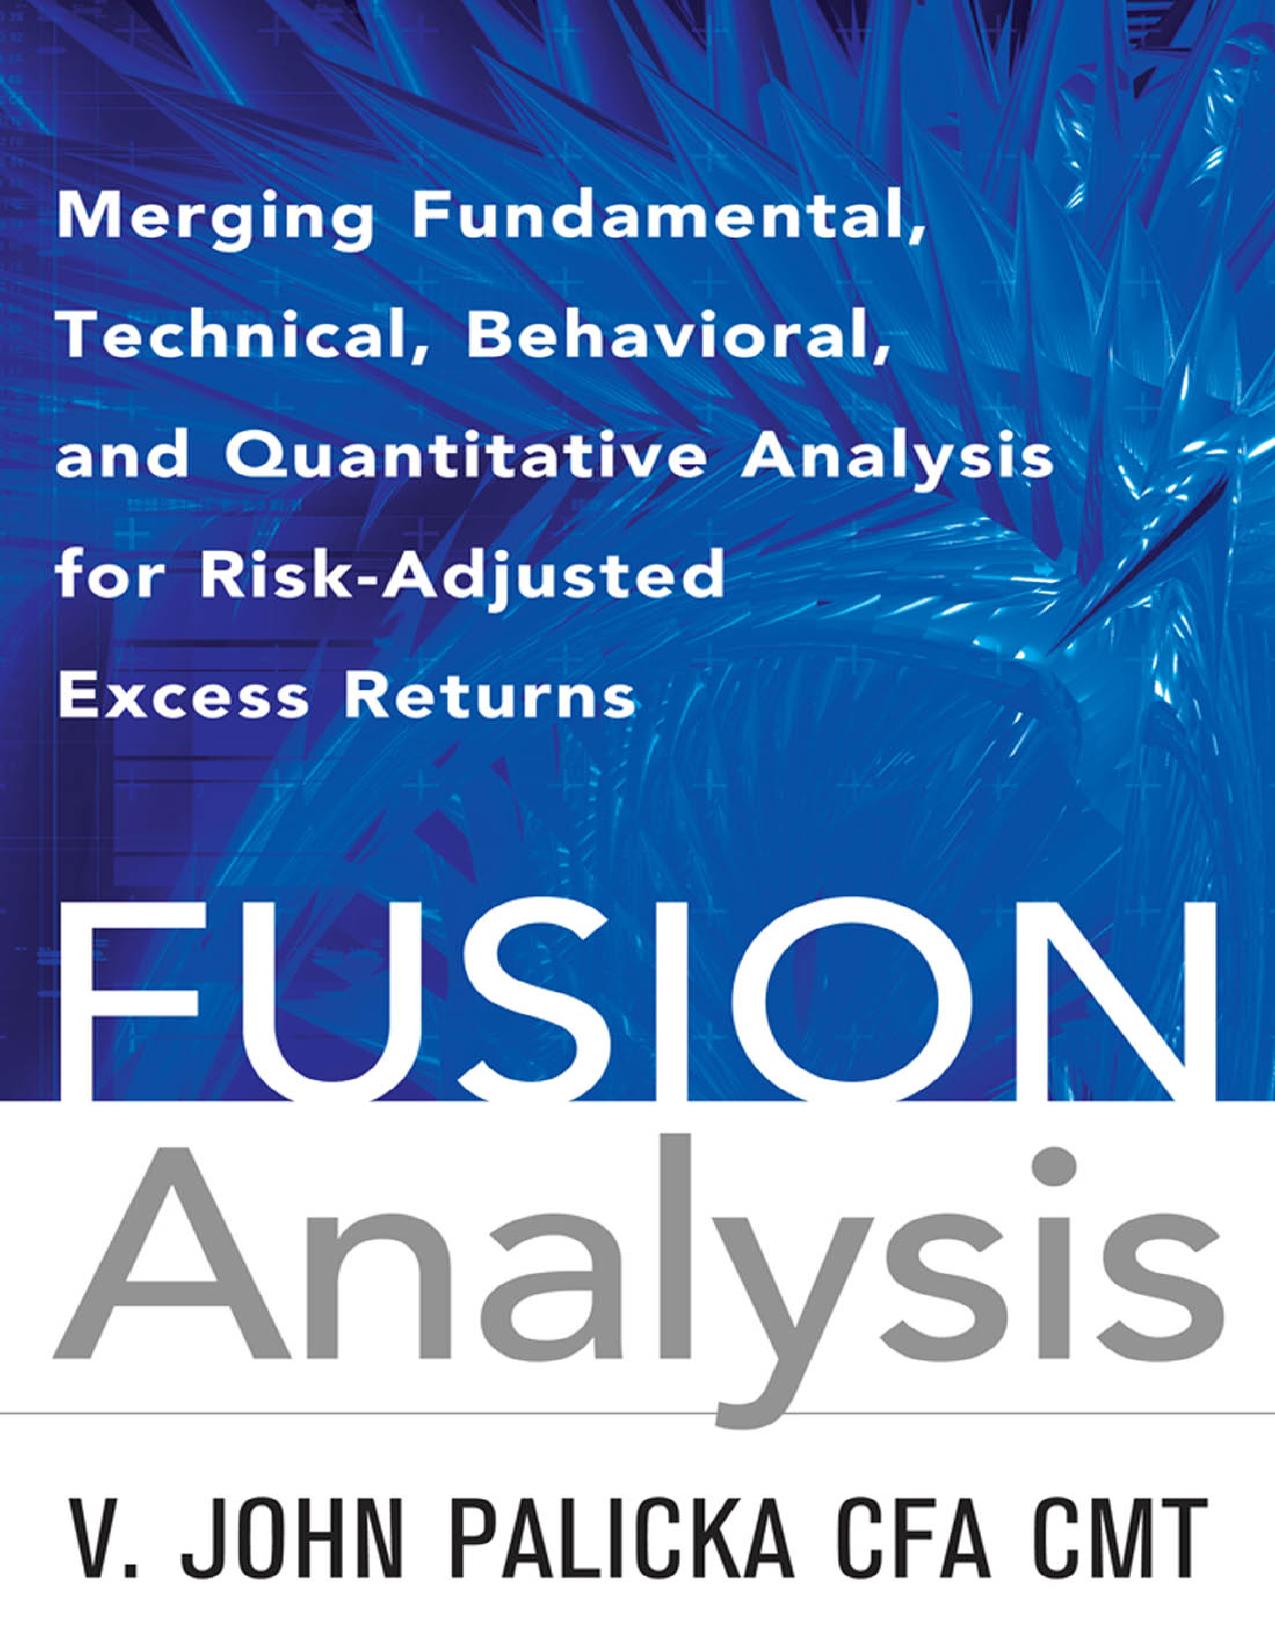 Fusion Analysis: Merging Fundamental and Technical Analysis for Risk-Adjusted Excess Returns by v. john palicka